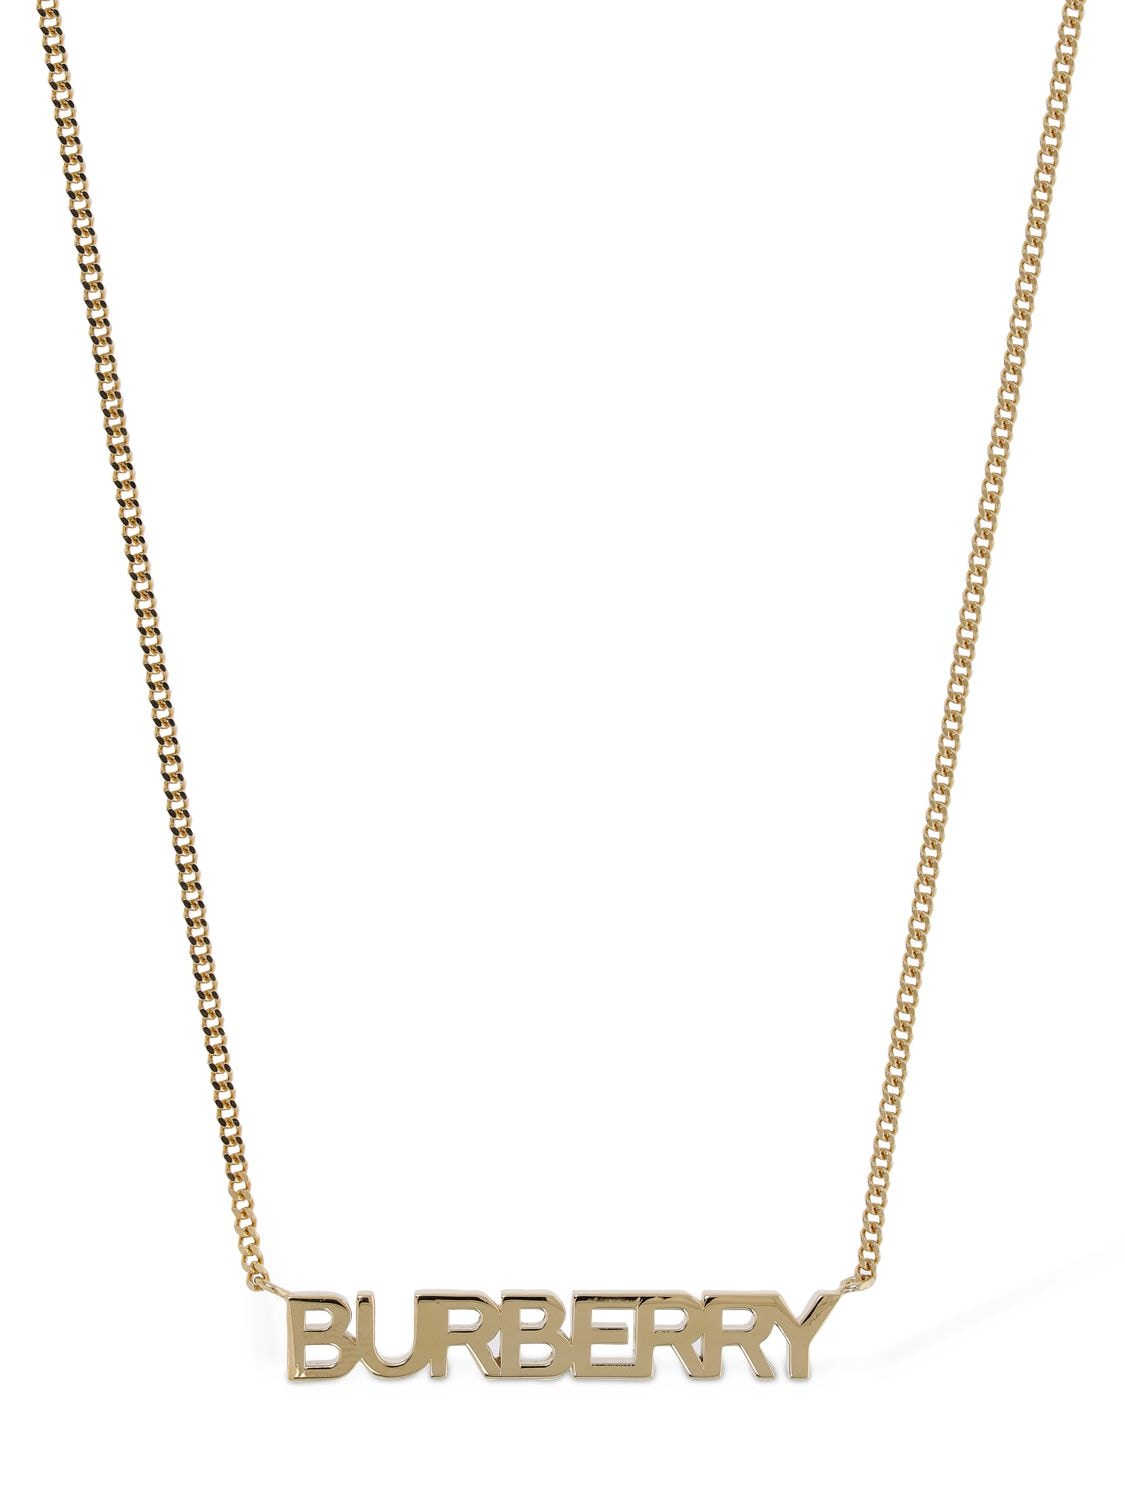 Burberry & Love Letter Necklace In Gold | ModeSens